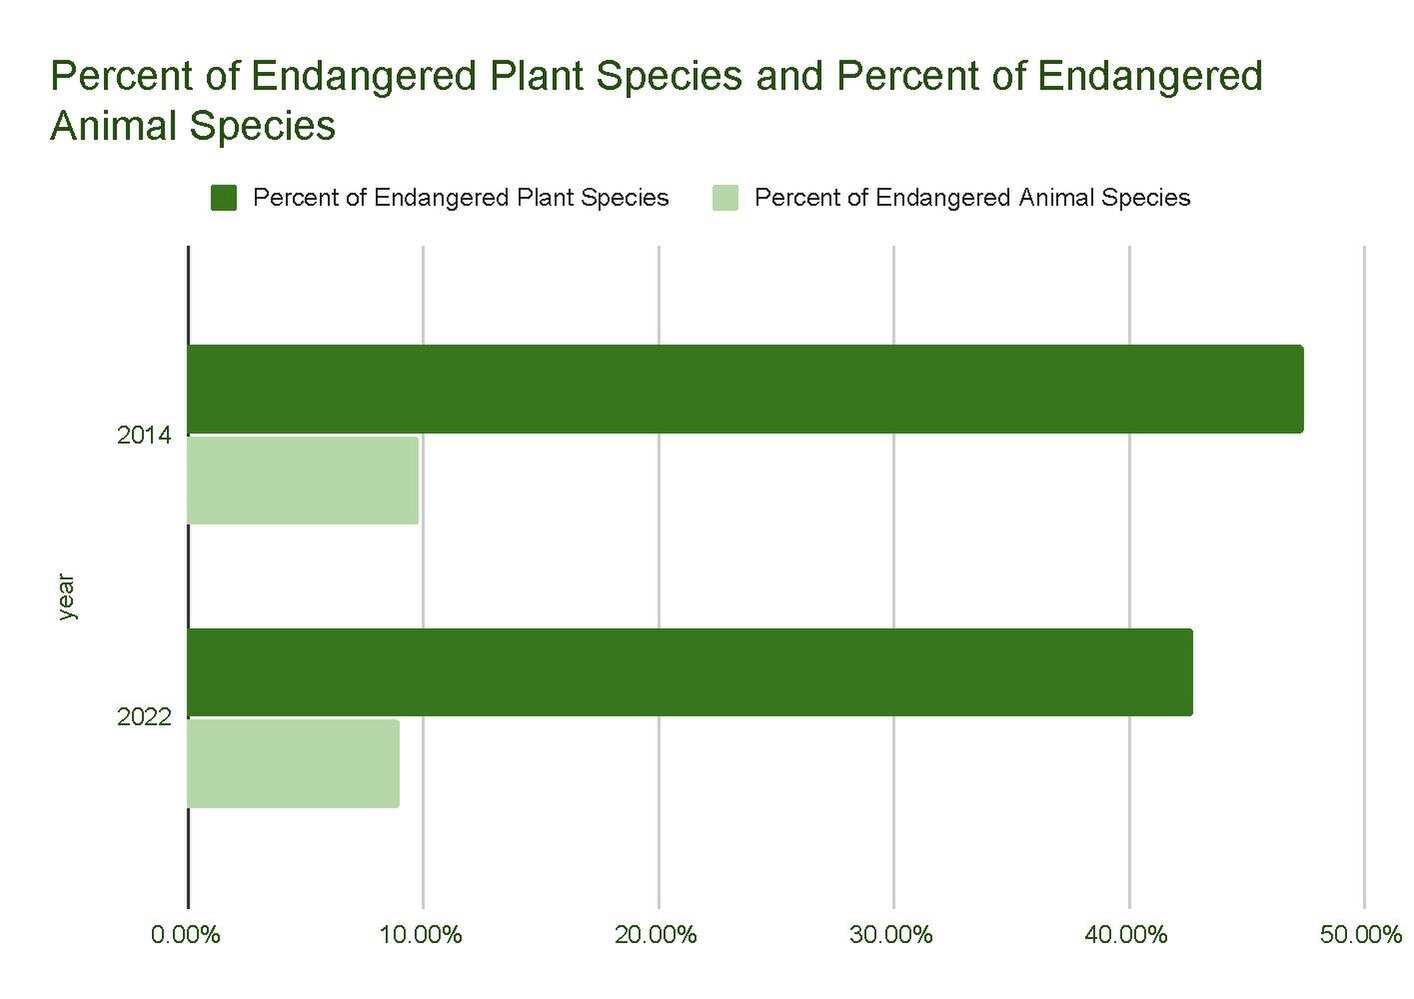 https://upload.wikimedia.org/wikipedia/commons/thumb/f/f6/Trends_in_Endangered_Species-_A_Visual_Representation_of_Plant_and_Animal_Conservation_in_Brazil_%282014-2022%29.pdf/page1-1414px-Trends_in_Endangered_Species-_A_Visual_Representation_of_Plant_and_Animal_Conservation_in_Brazil_%282014-2022%29.pdf.jpg